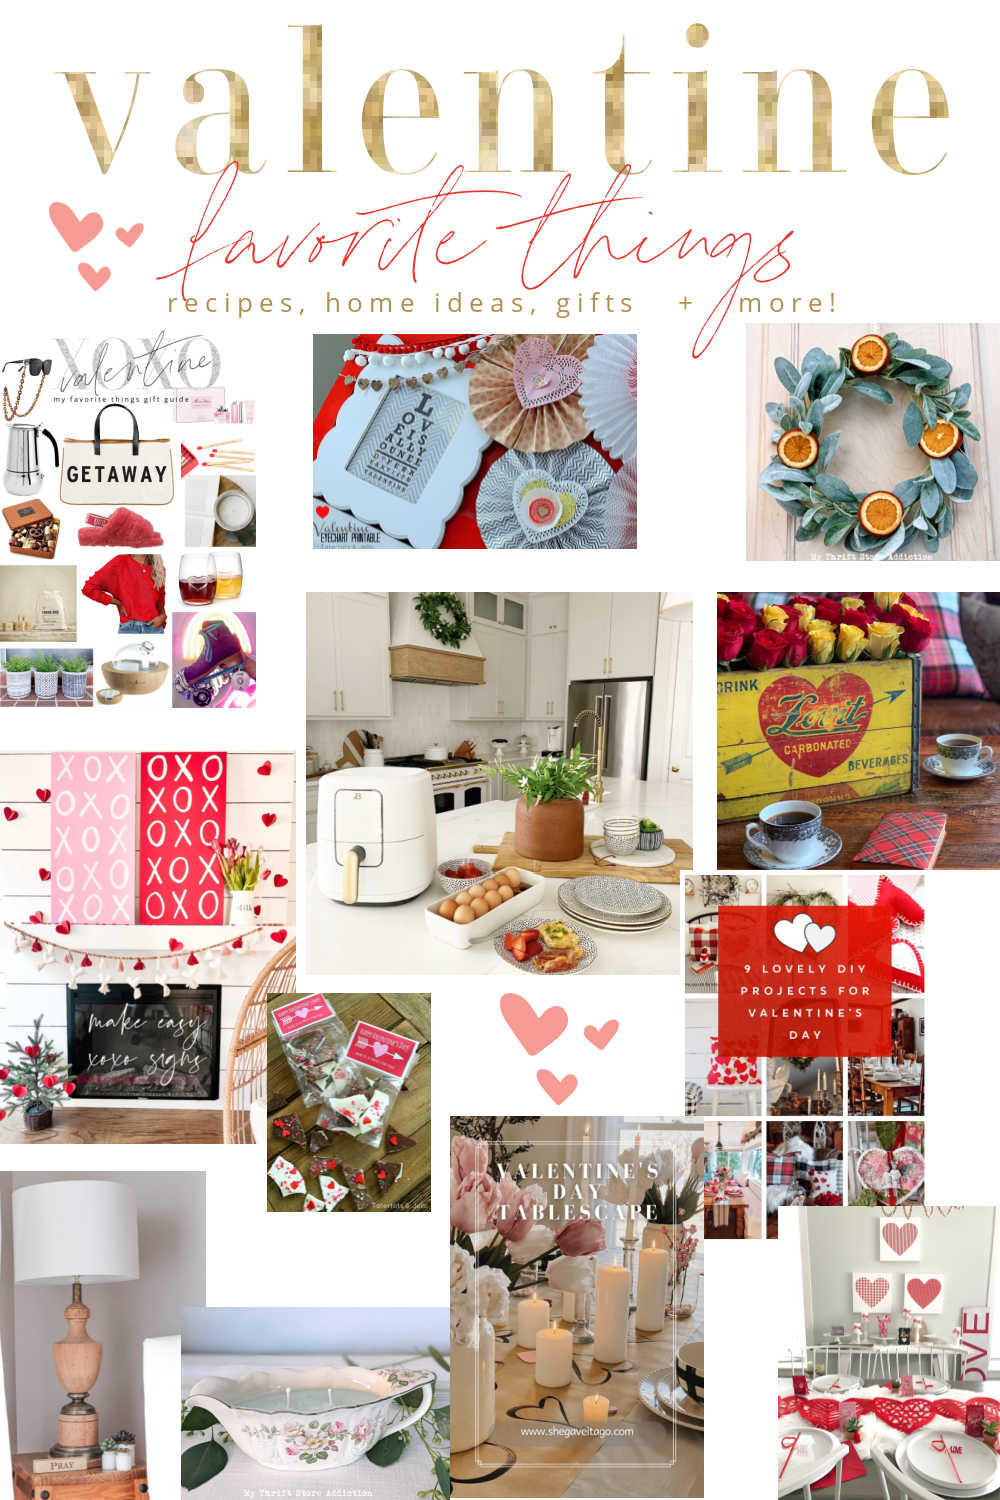 My Favorite Things This Week - Pretty Valentine Ideas! Celebrate the season of love with these Valentine projects, recipes and home ideas! 